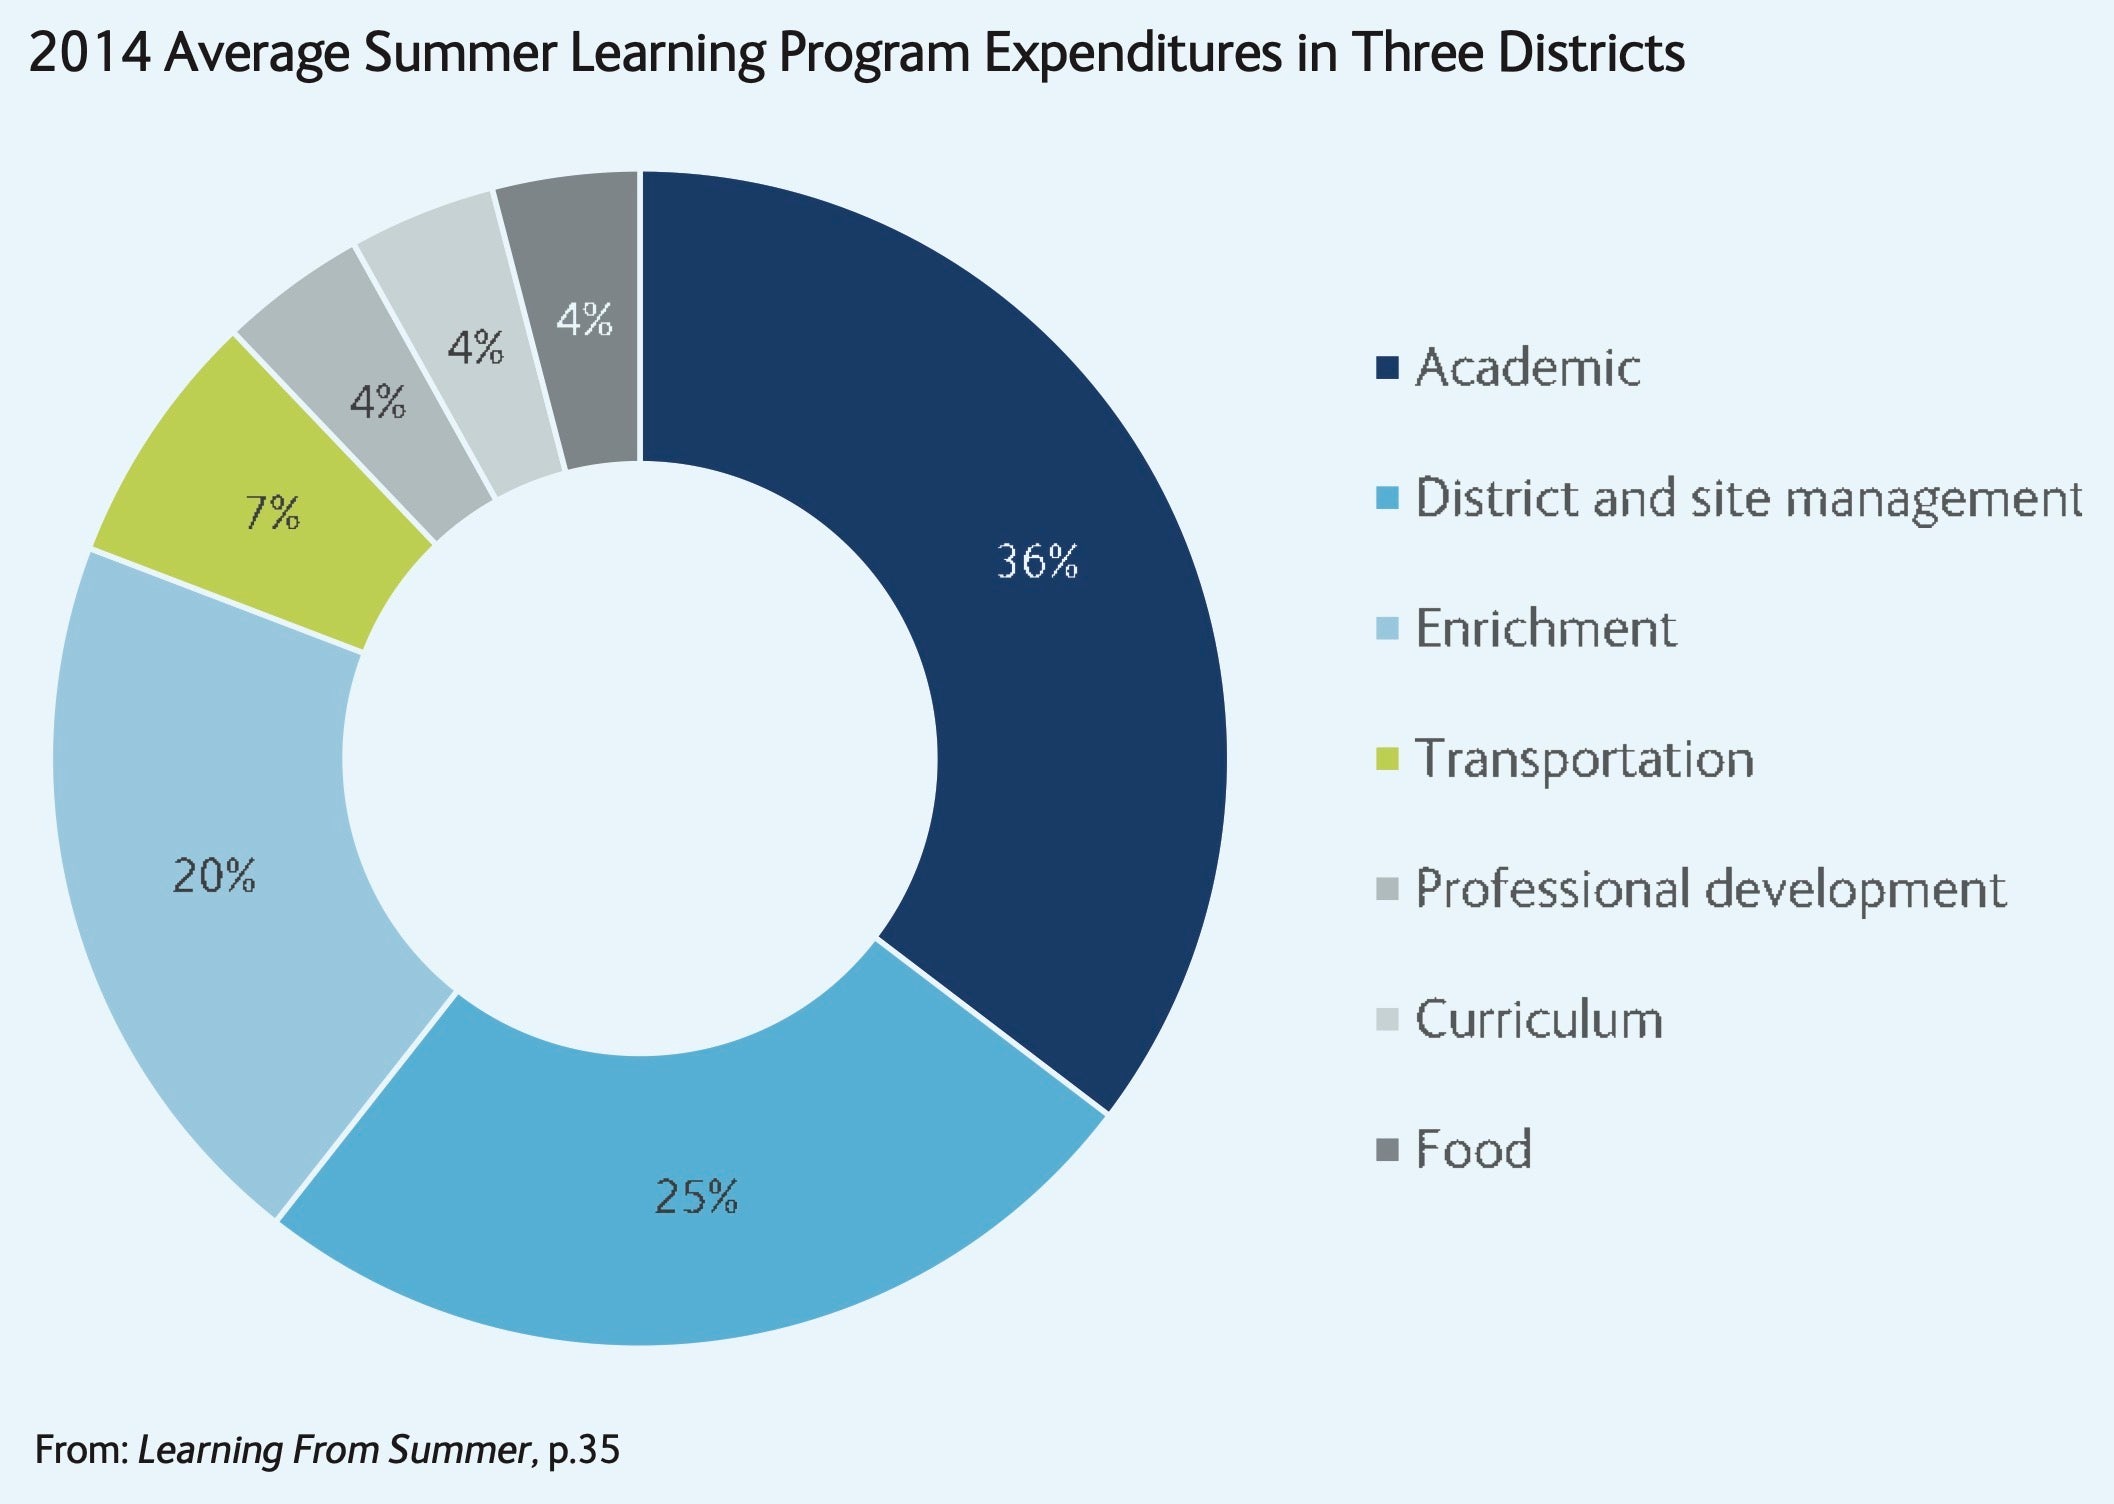 2014 Average Summer Learning Program Expenditures in Three Districts